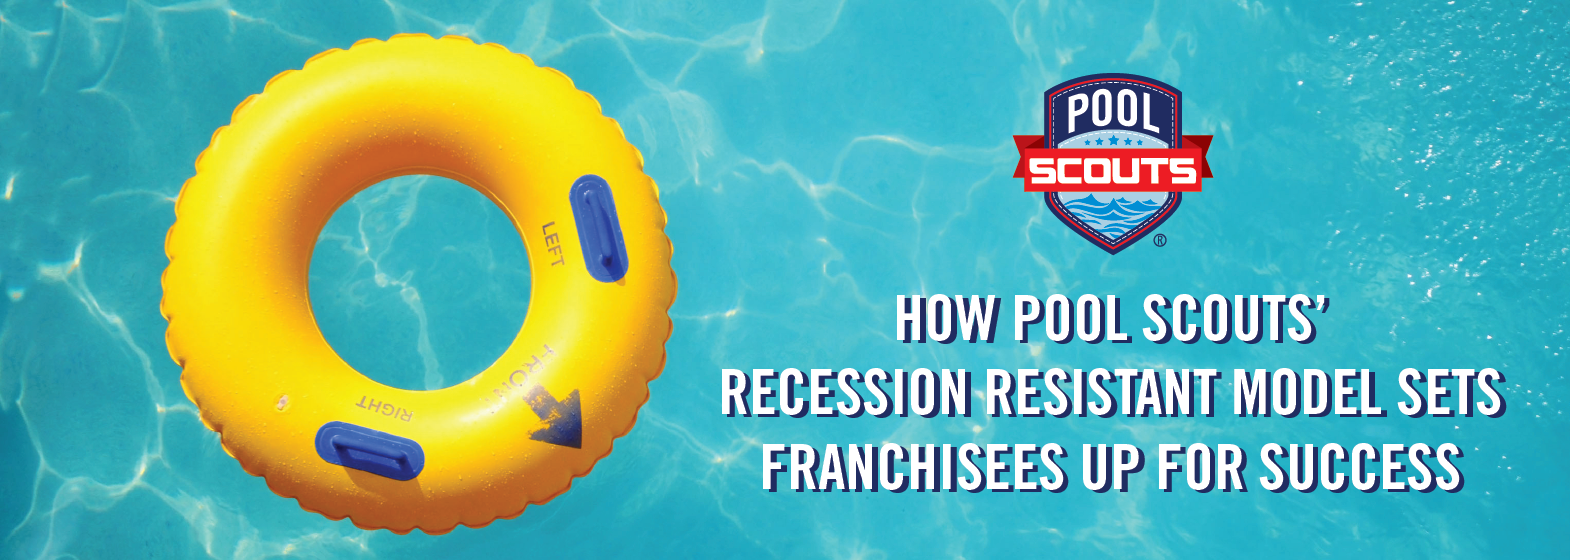 How Pool Scouts’ Recession Resistant Model Sets Franchisees Up For Success